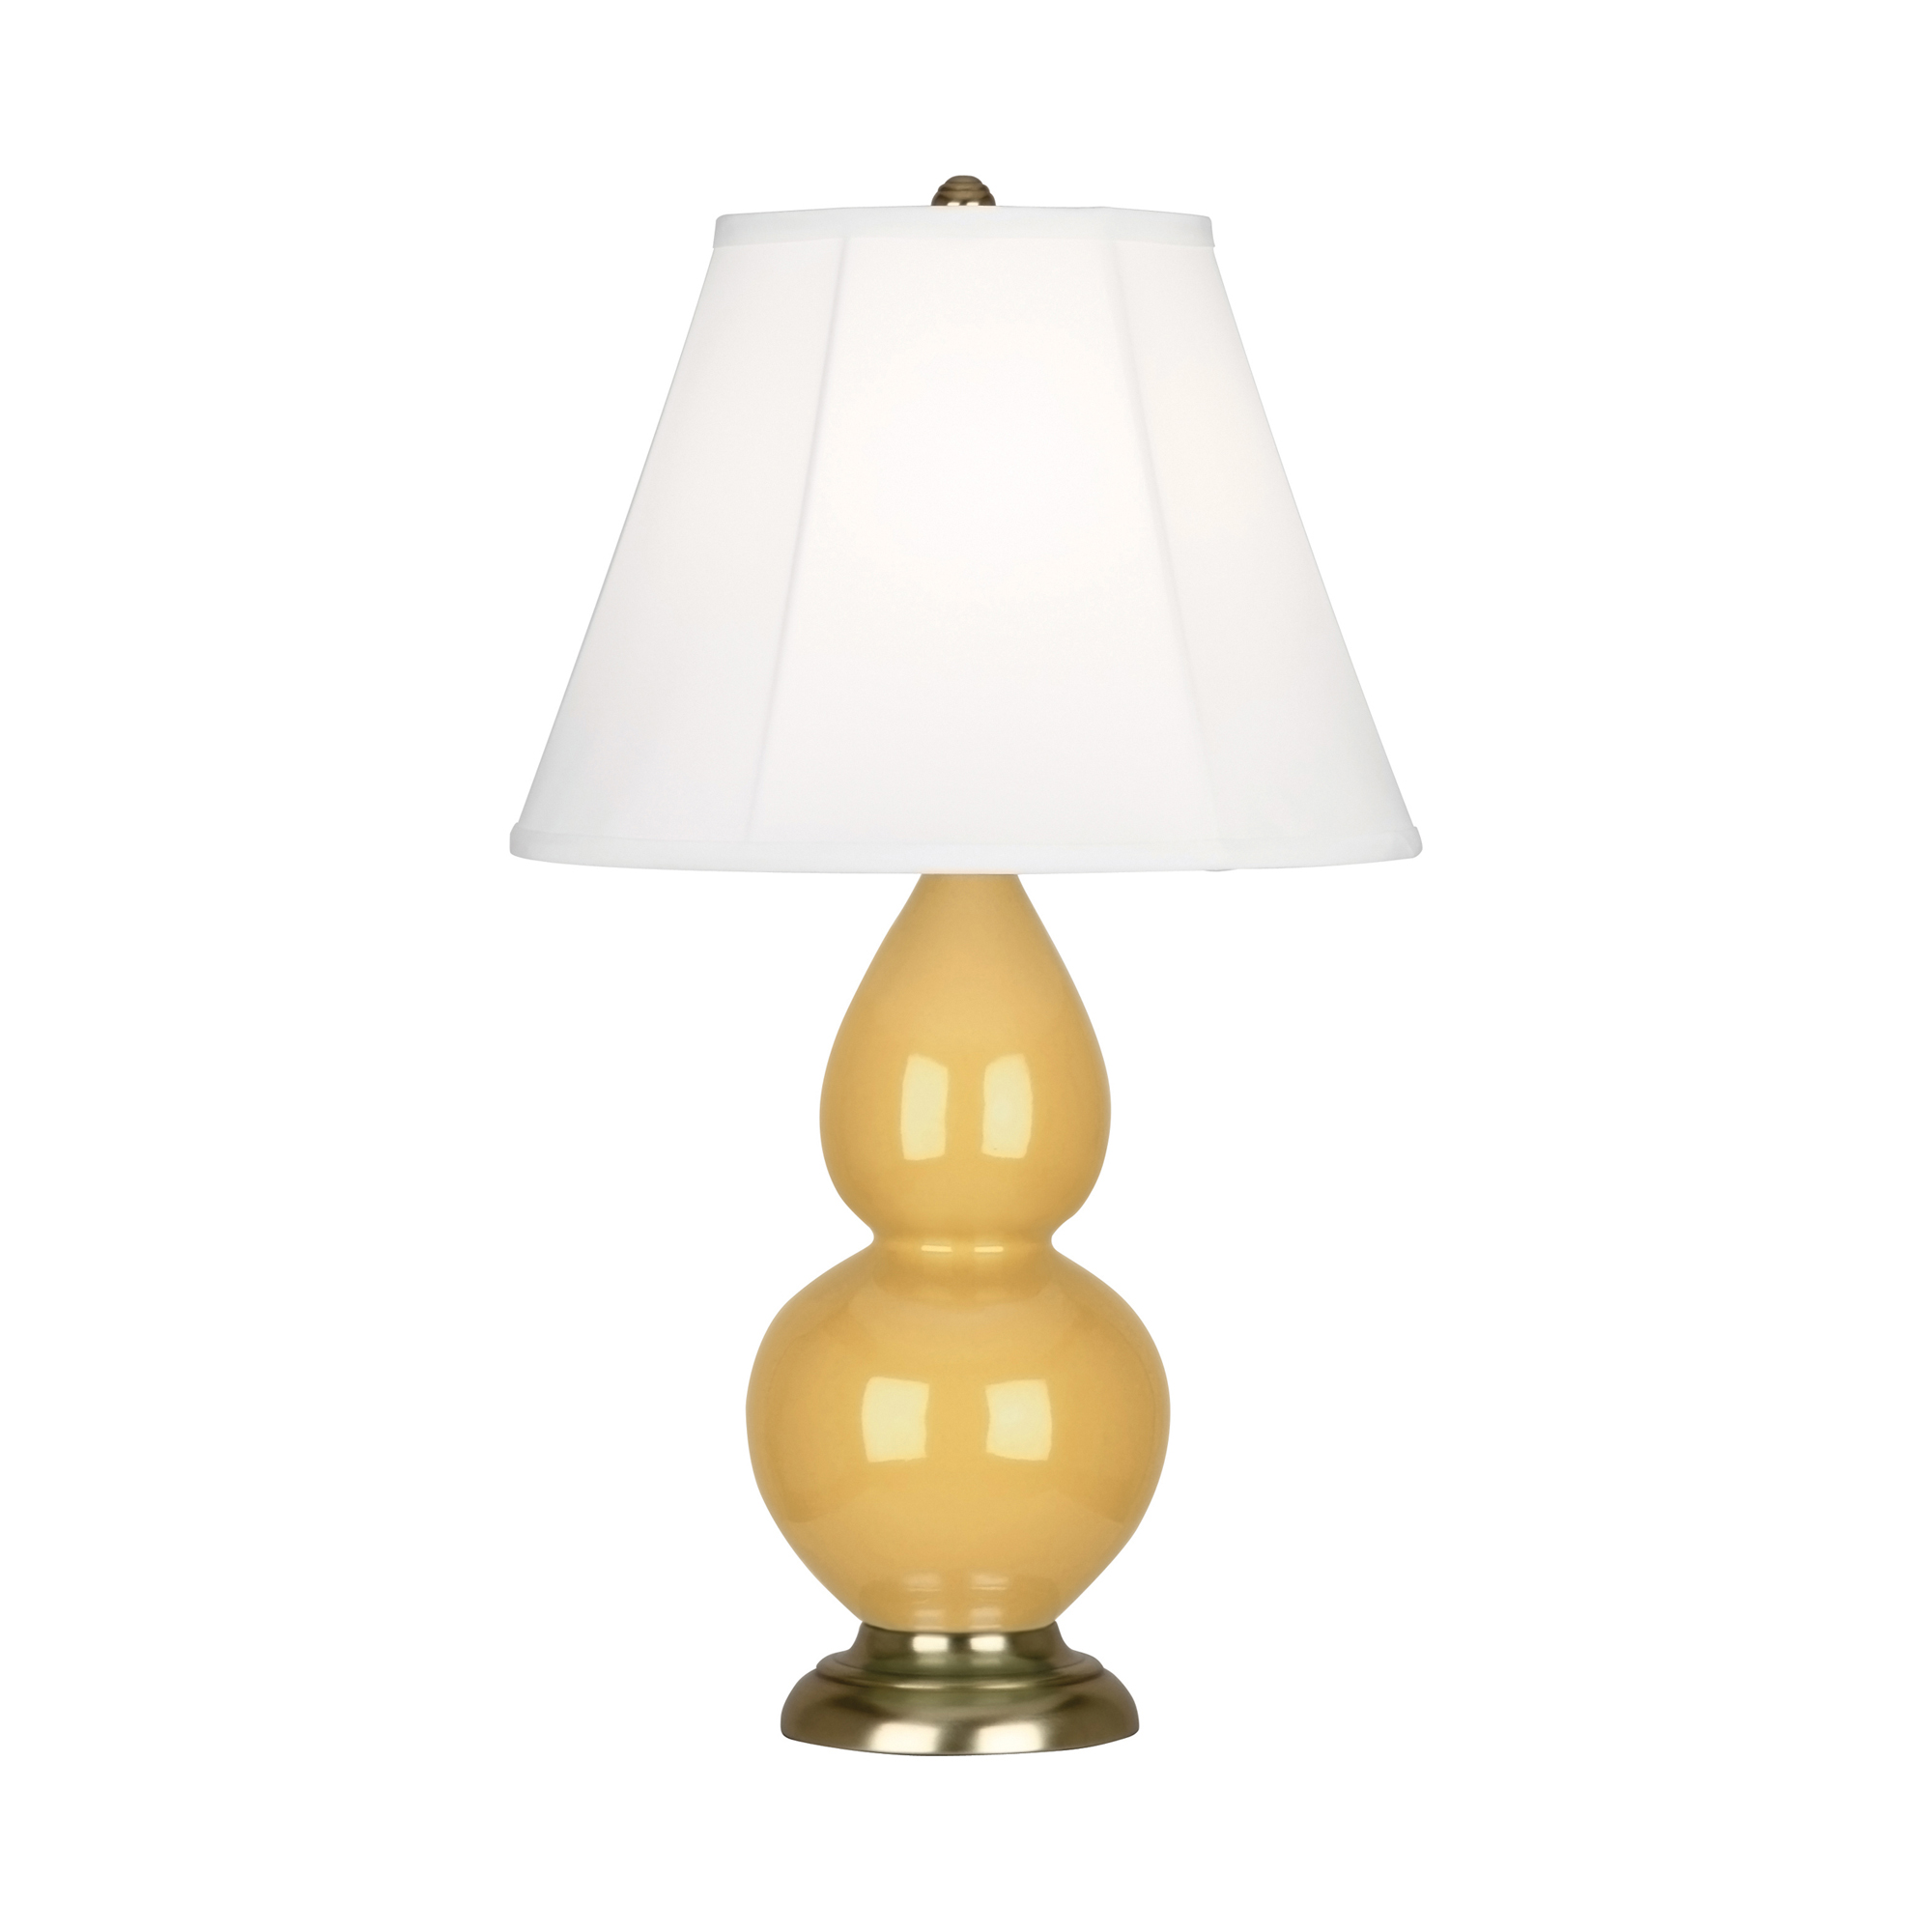 Small Double Gourd Accent Lamp Style #SU10